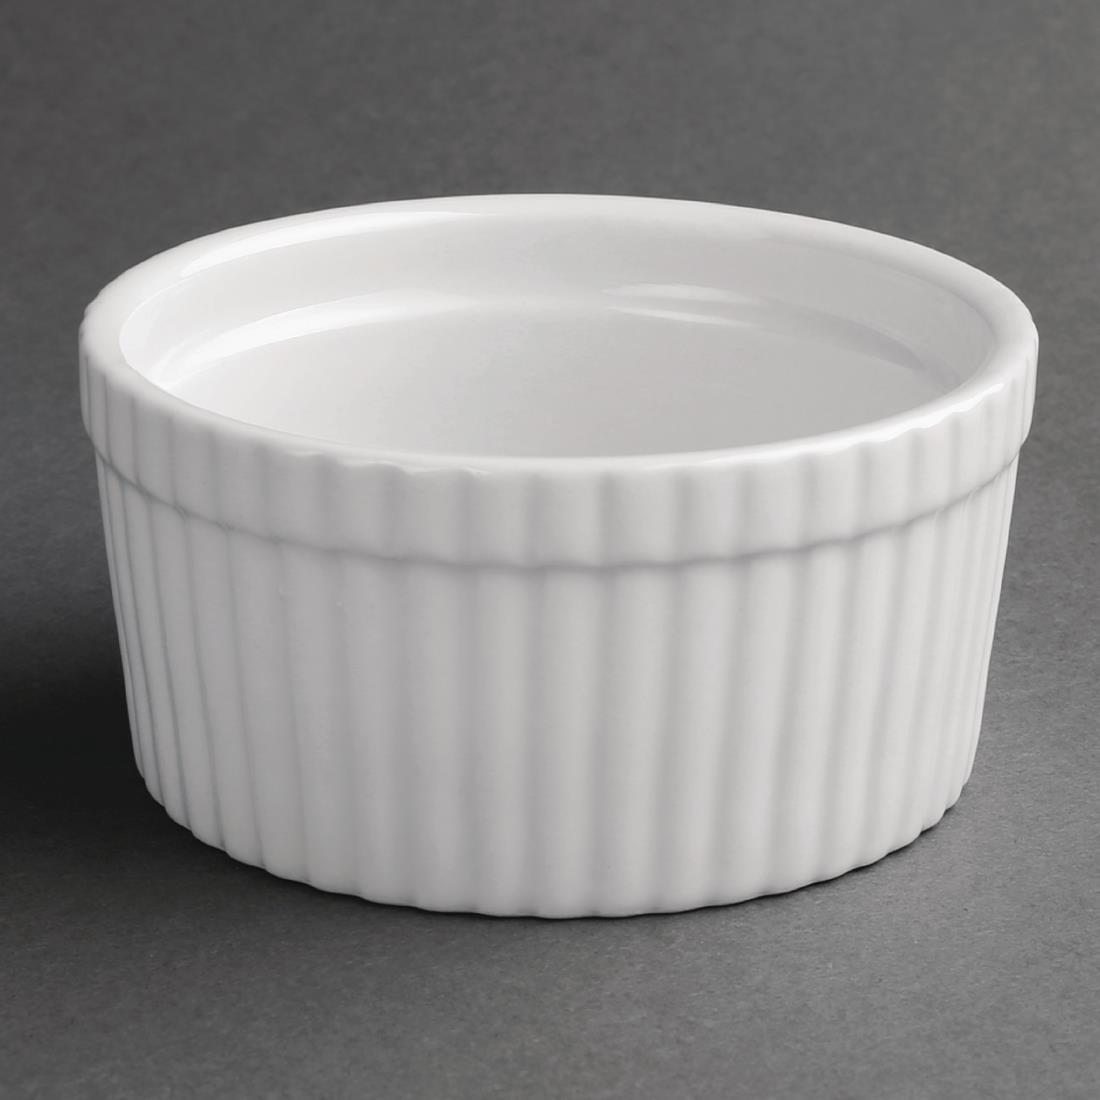 Olympia Whiteware Souffle Dishes 105mm (Pack of 6) - W431  - 1